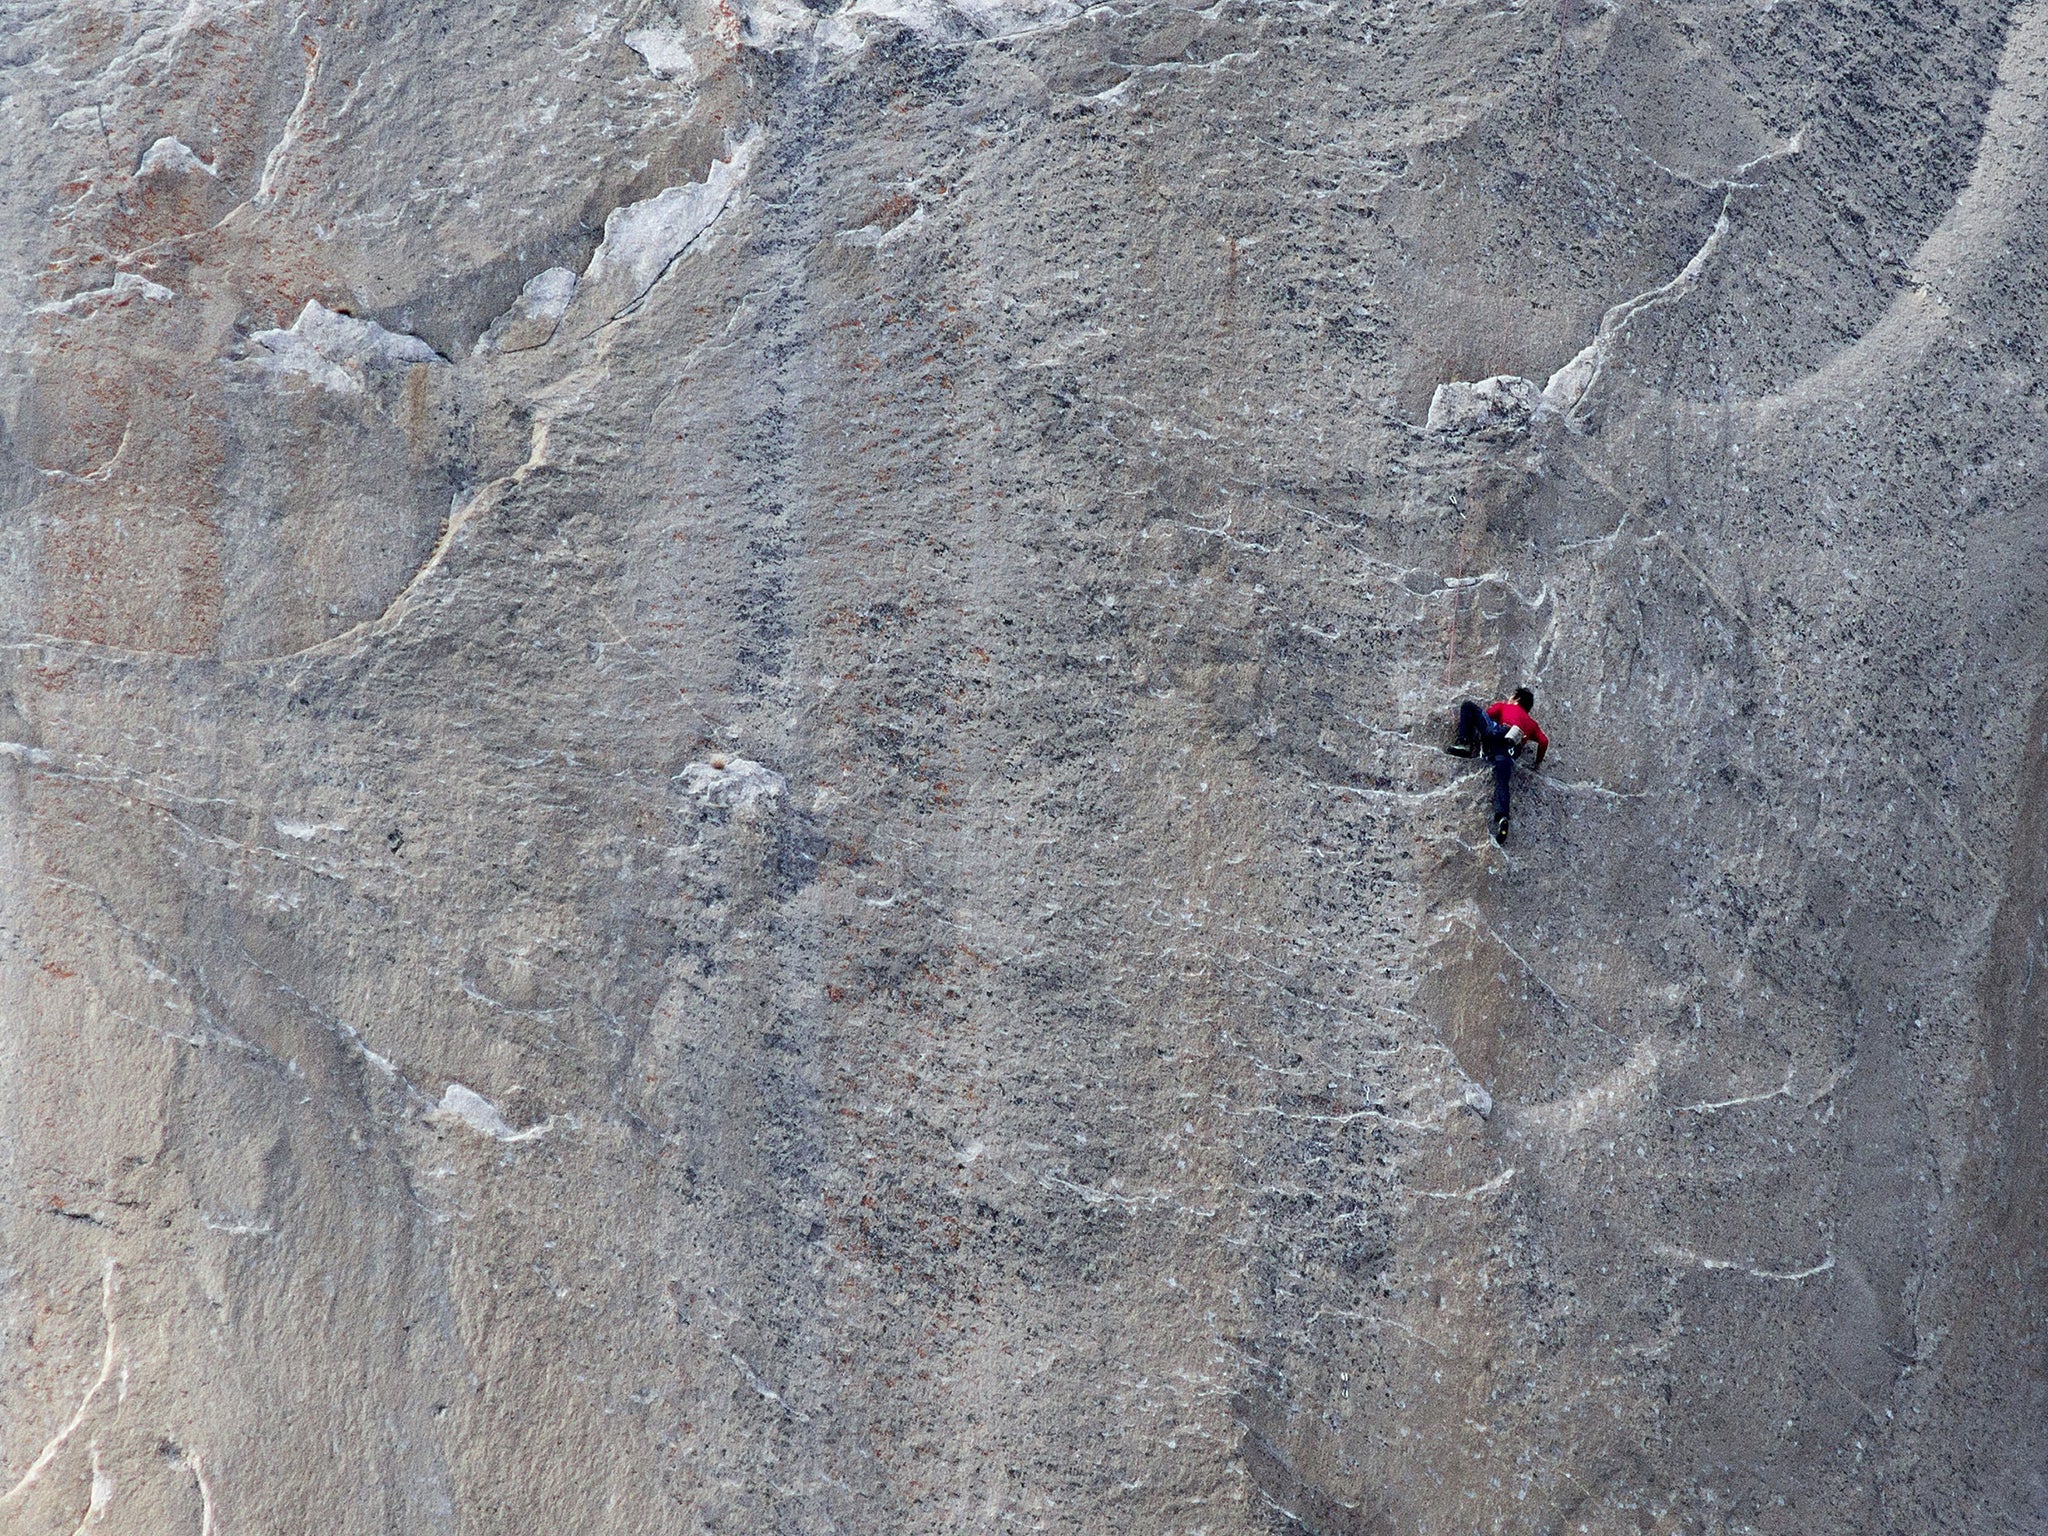 Kevin Jorgeson climbs what has been called the hardest rock climb in the world